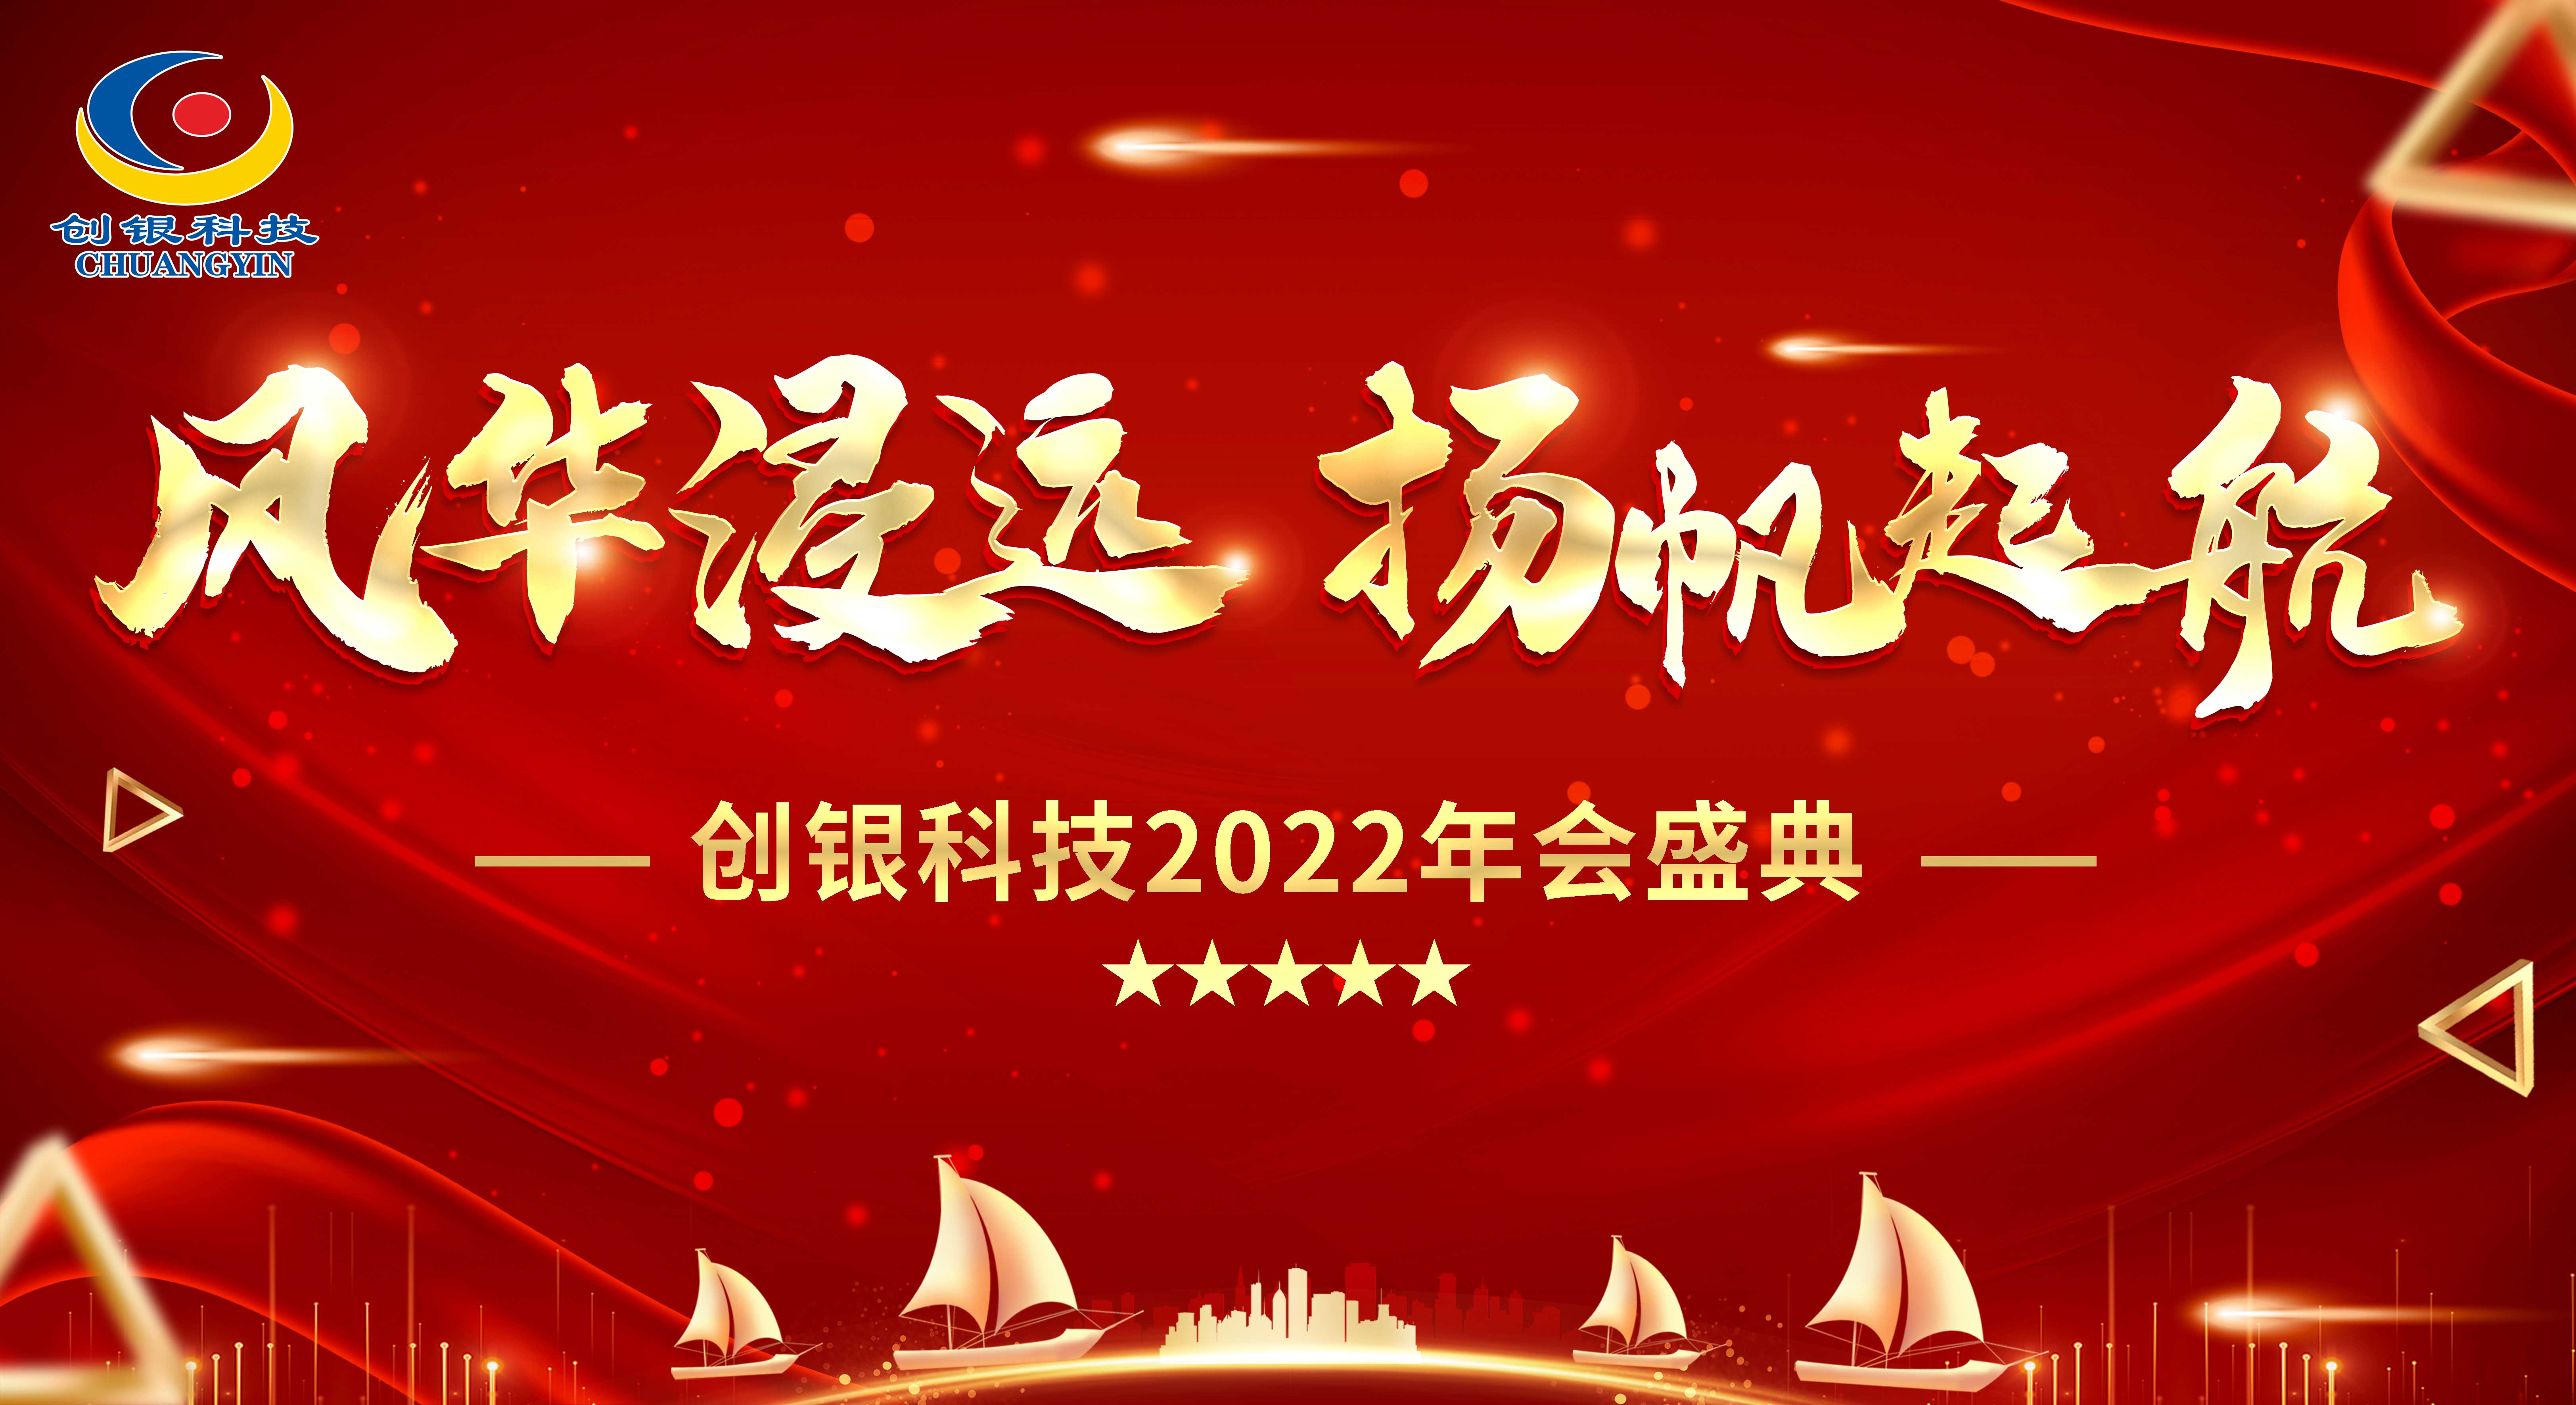 The year-end summary and 2022 conference grand ceremony of Chuangyin technology's